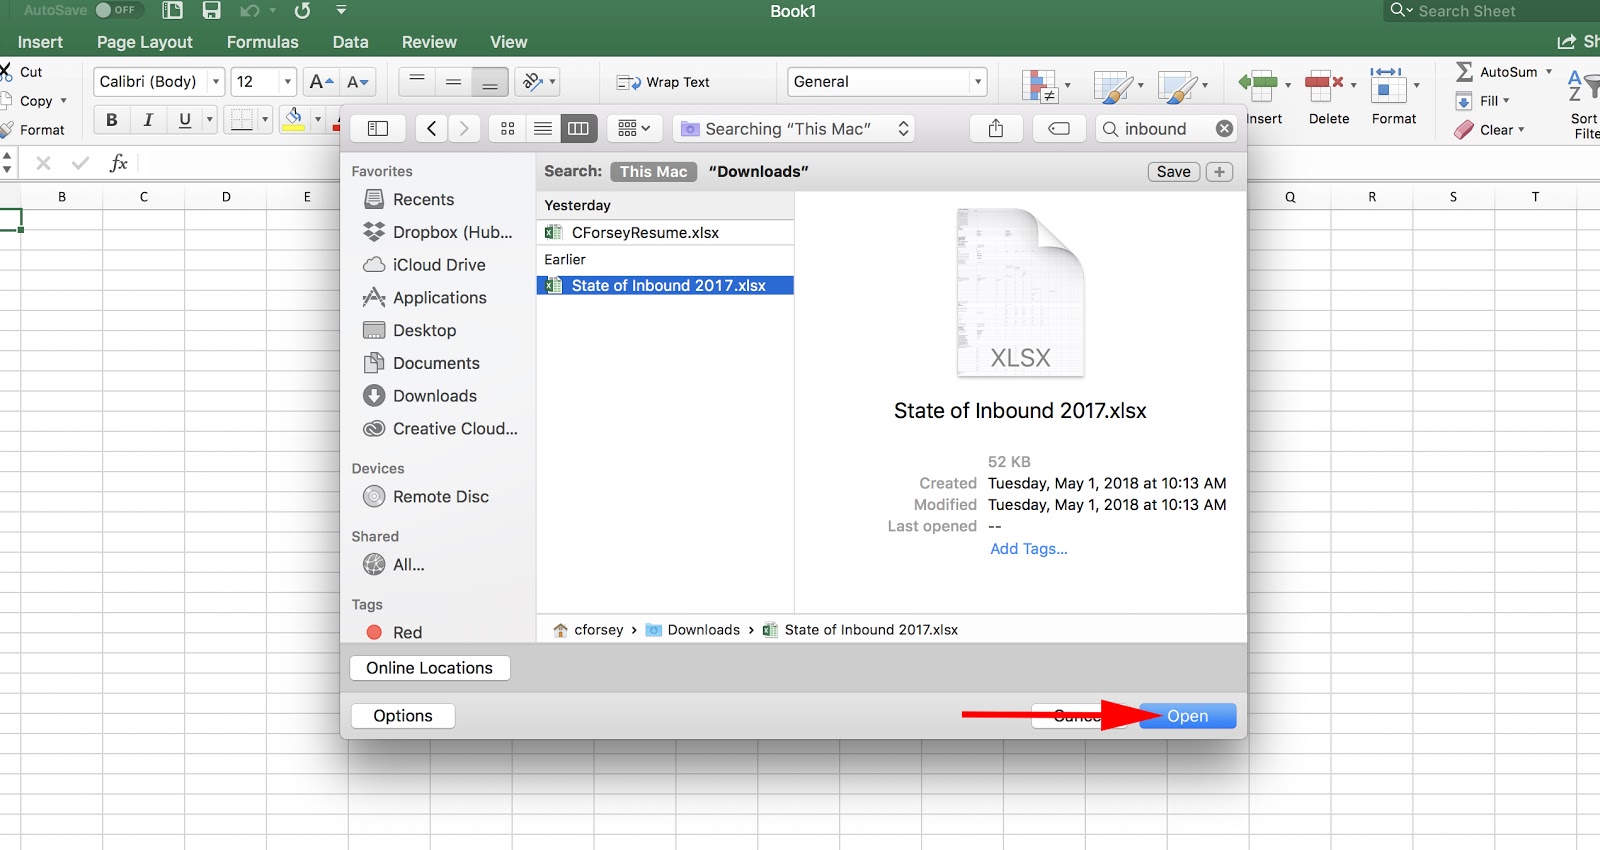 How to convert file from pdf to excel